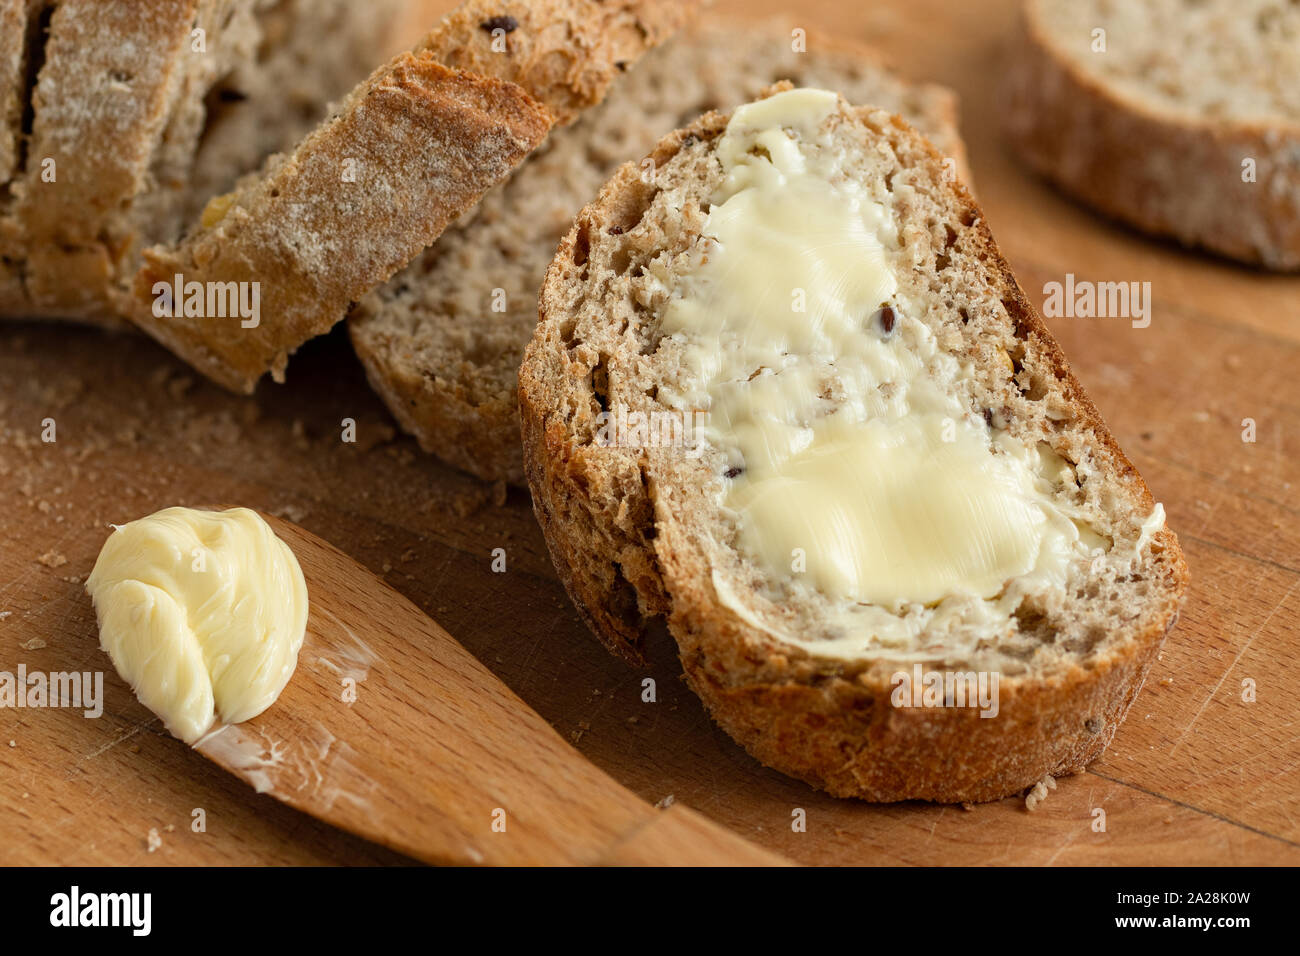 Closeup of buttered slice of whole wheat rustic bread next to cut bread and wood knife. Light wood board. Stock Photo